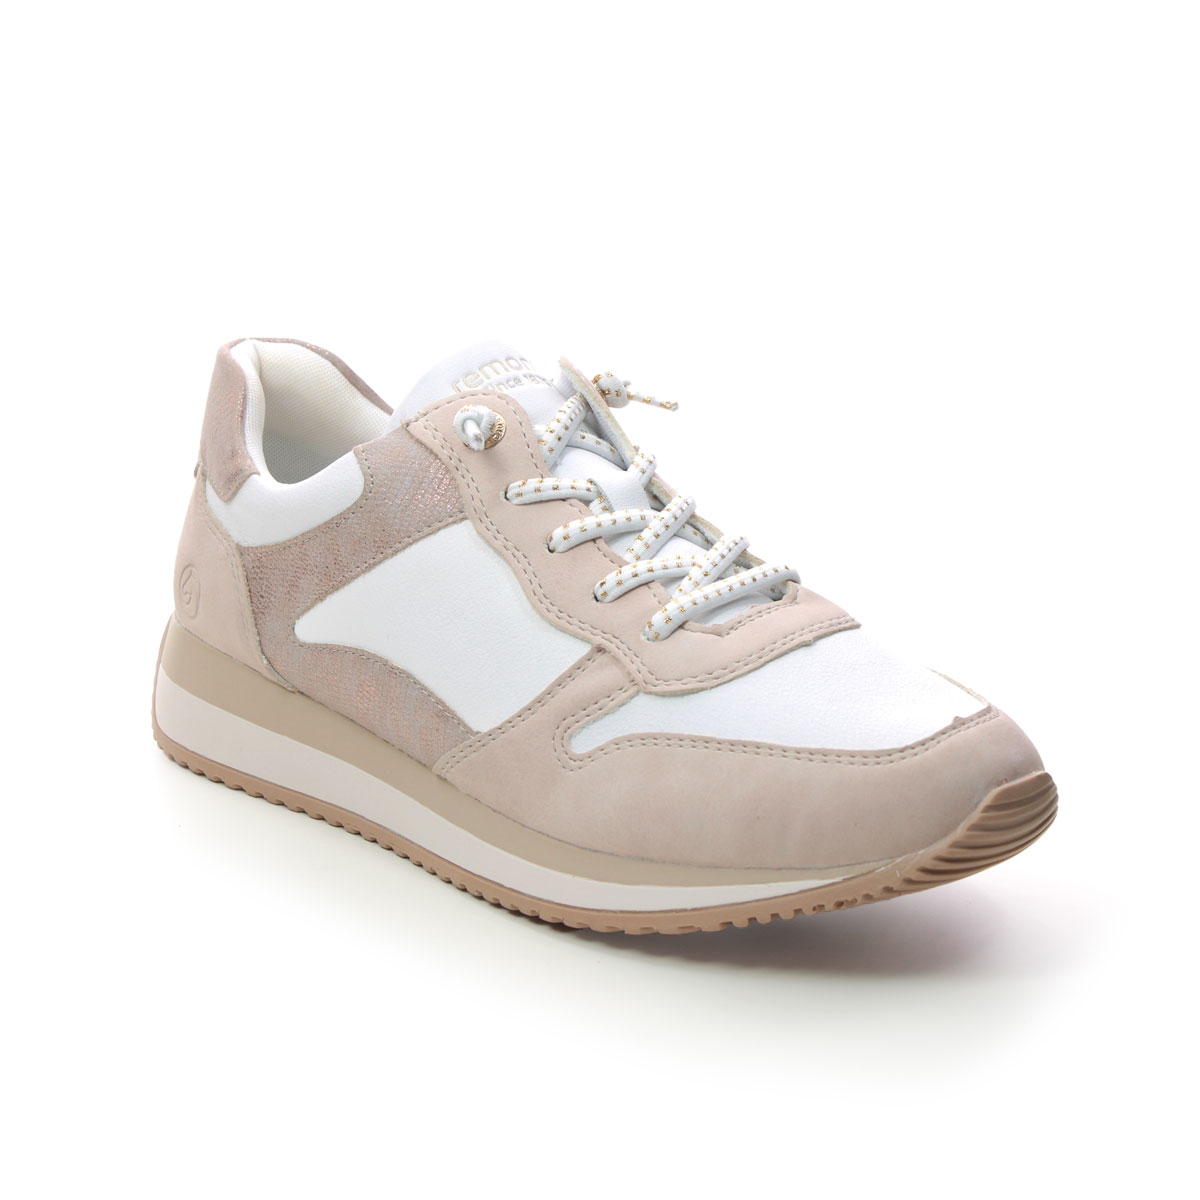 Remonte D0H00-31 Vapod Bungee White Rose gold Womens trainers in a Plain Leather and Man-made in Size 38